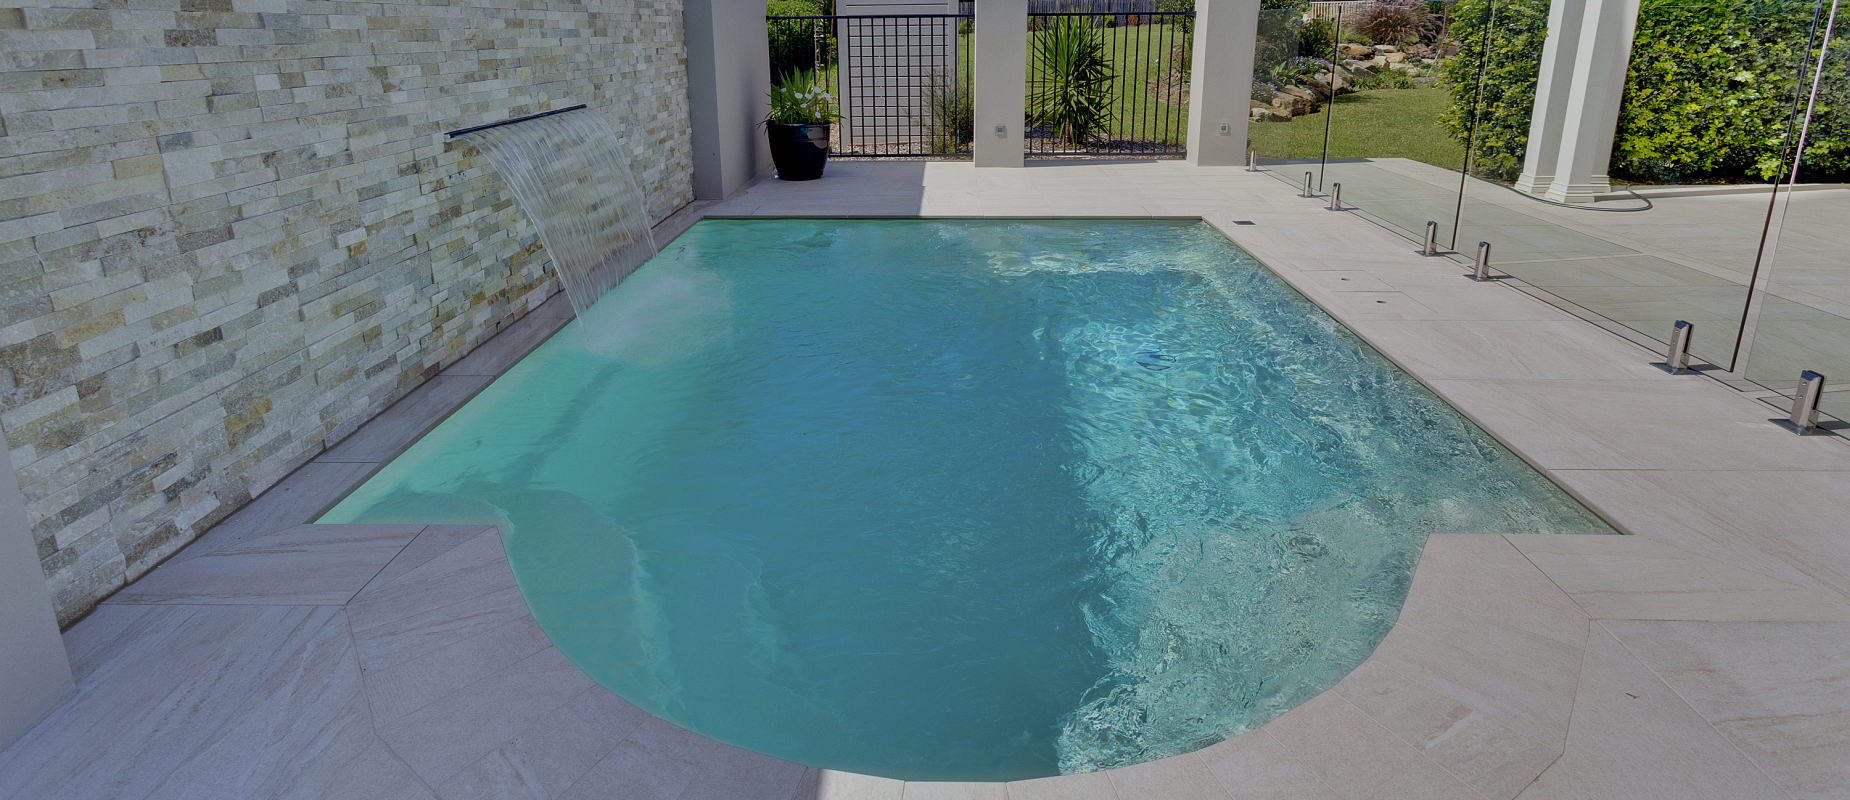 Compass-Pools-Australia_Plunge-Courtyard_Fibreglass-pool-with-water-wall